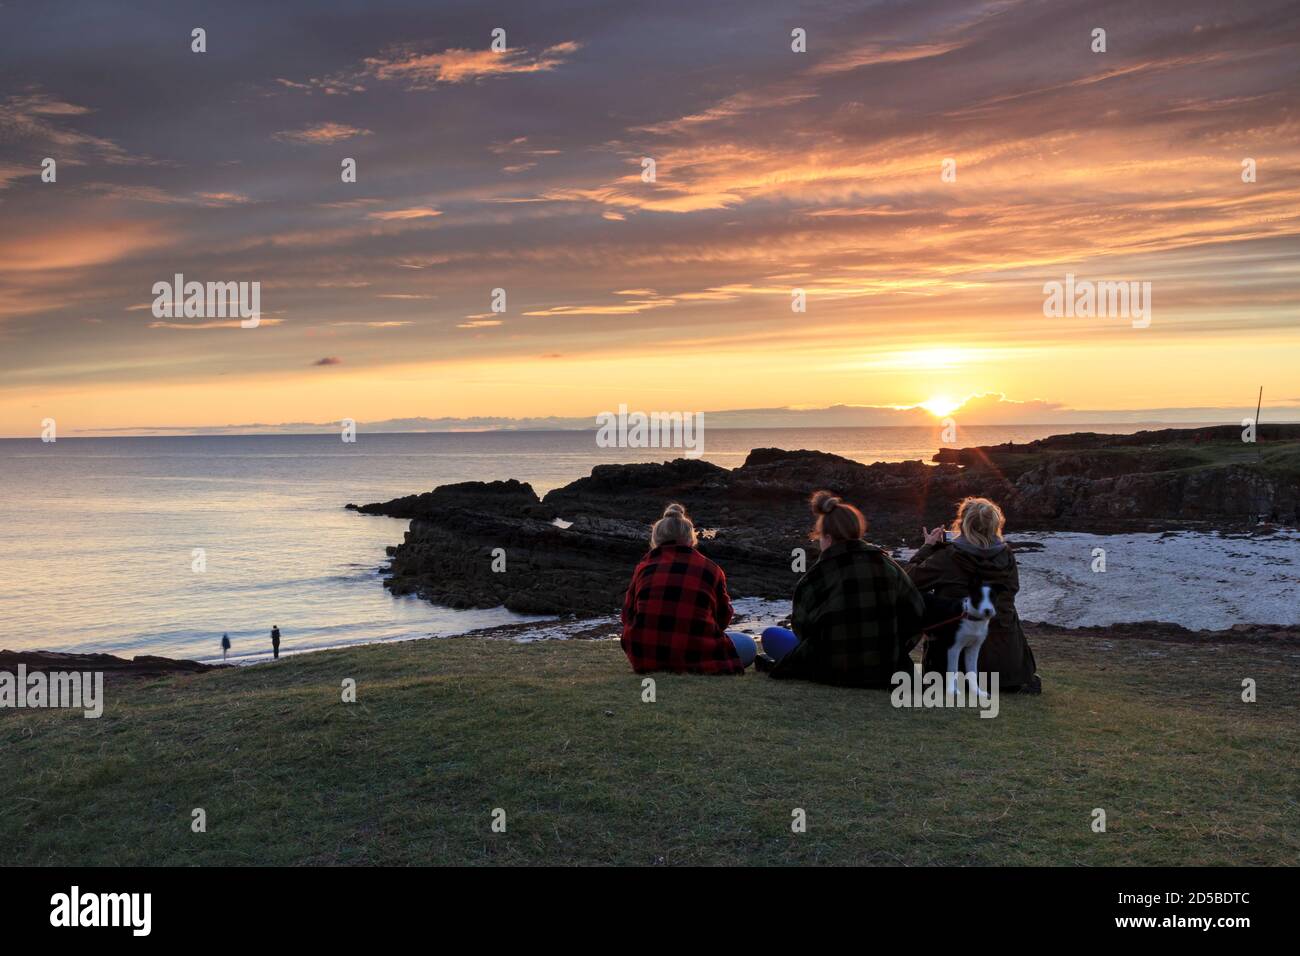 People Watching the Sunset over Clachtoll Bay, NW Highlands of Scotland, UK Stock Photo